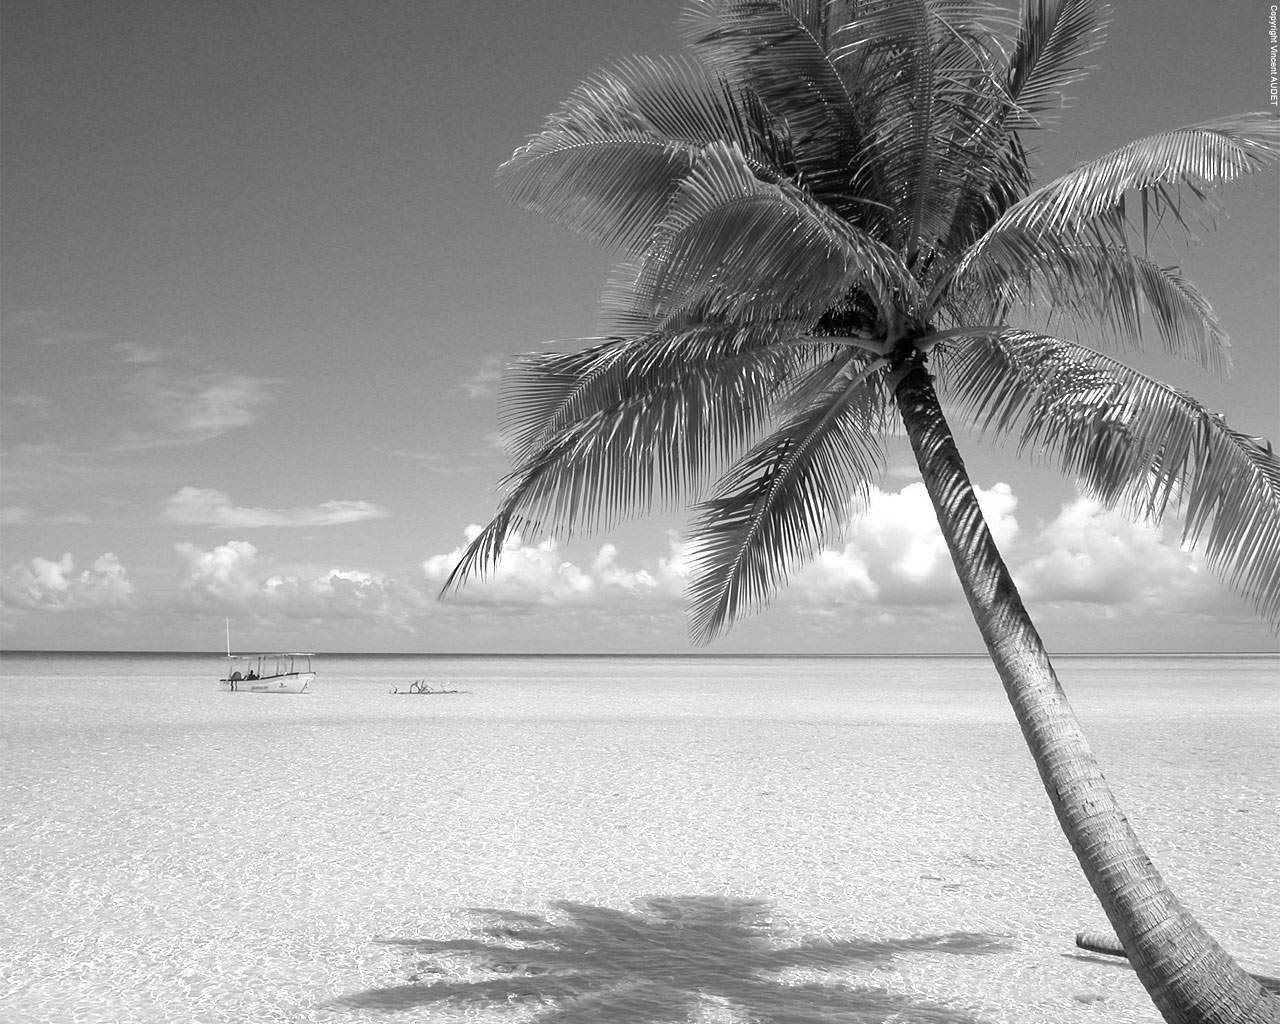 Beach Black and White Wallpapers - Top Free Beach Black and White